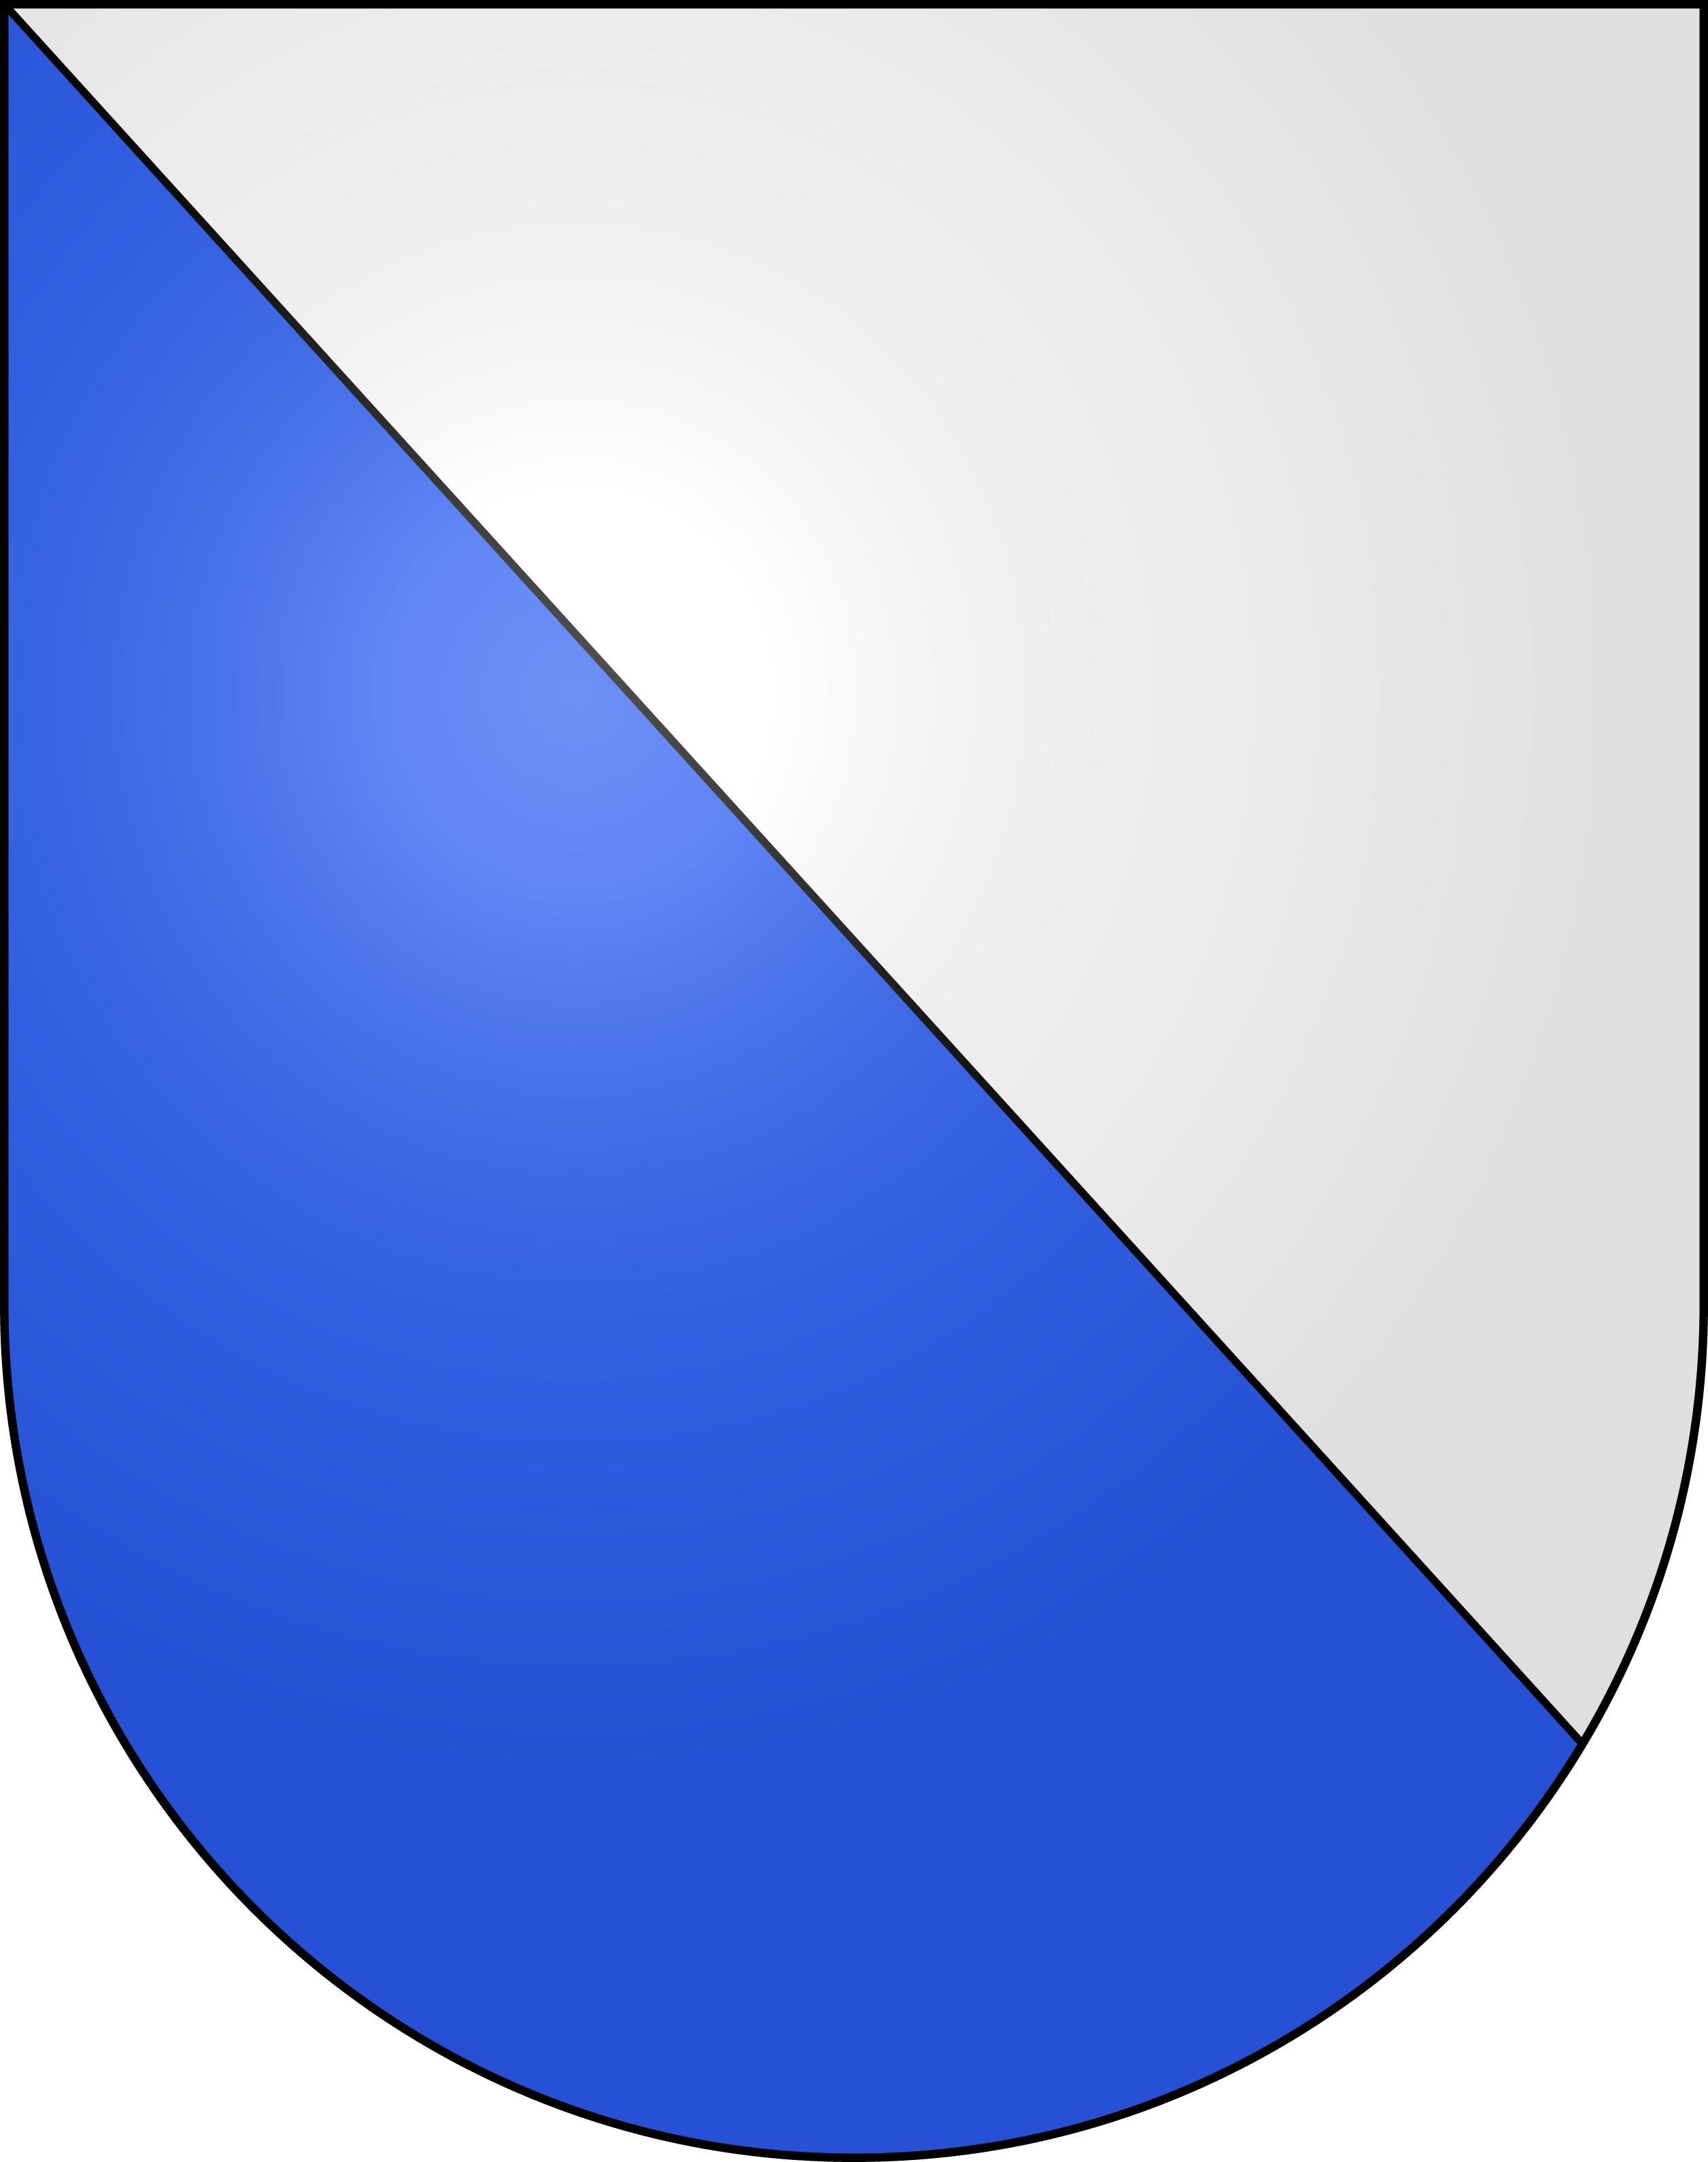 The Stockholm city coat of arms